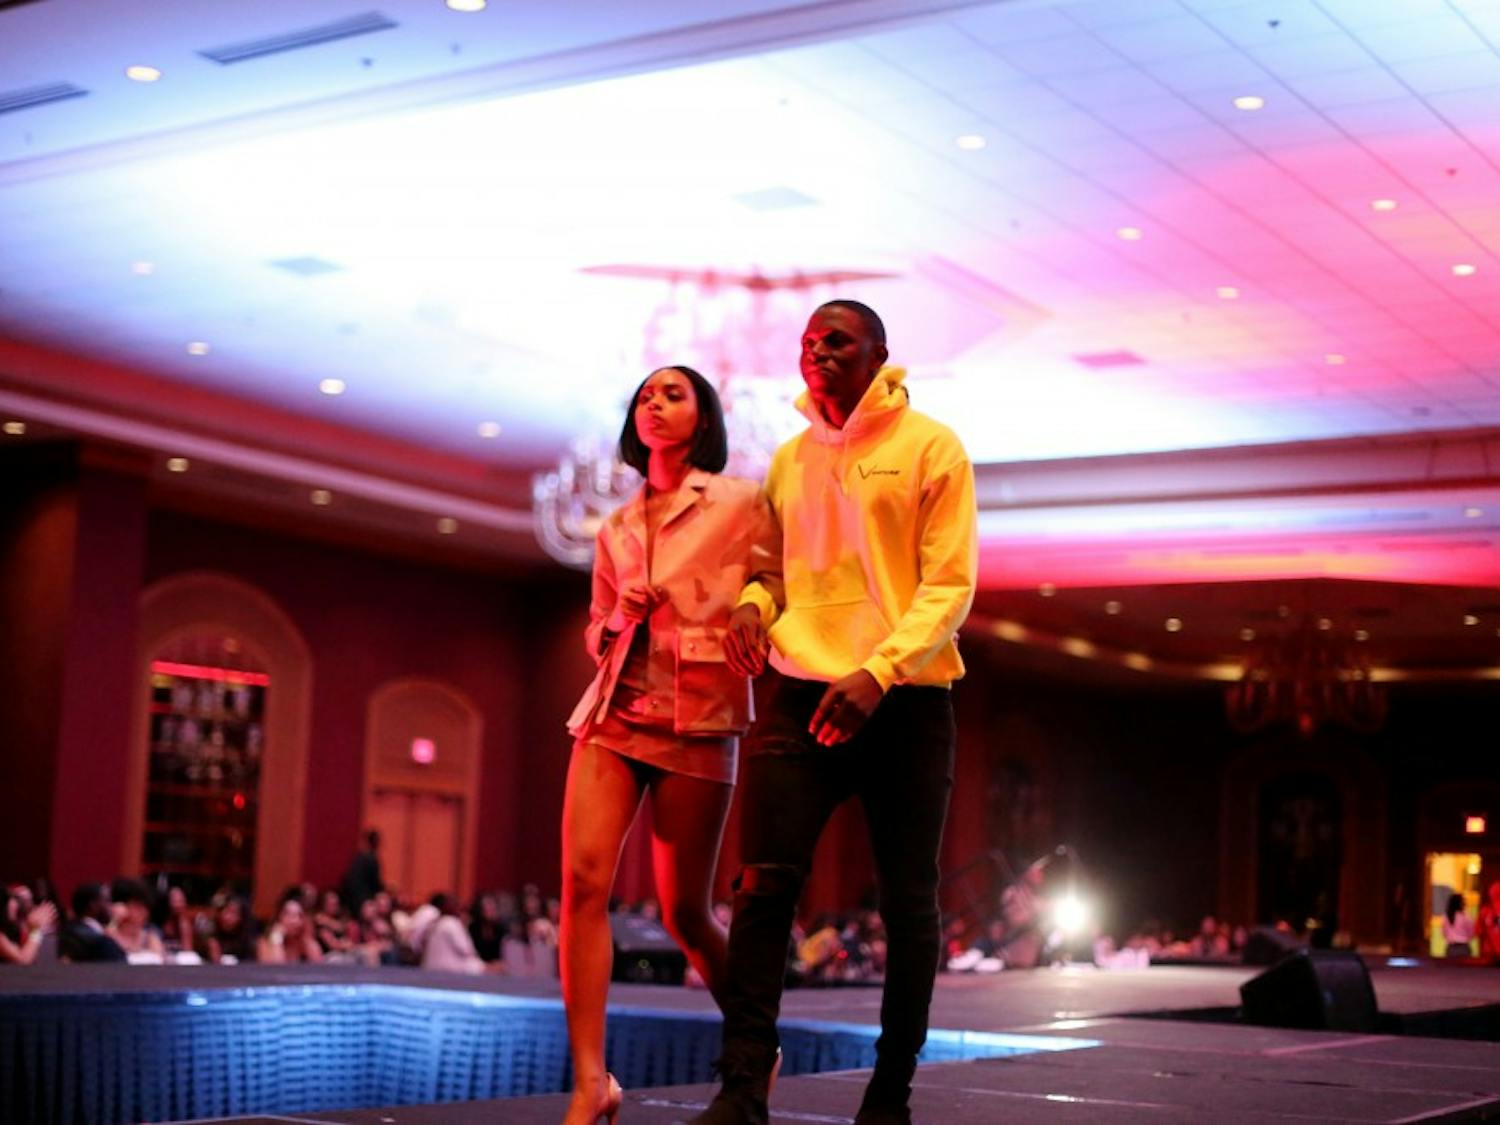 Models pose for Black Student Union’s Black Explosion fashion show. The event celebrated the 50th anniversary of BSU and showcased student and local talent in the fields of music, dance and clothing.